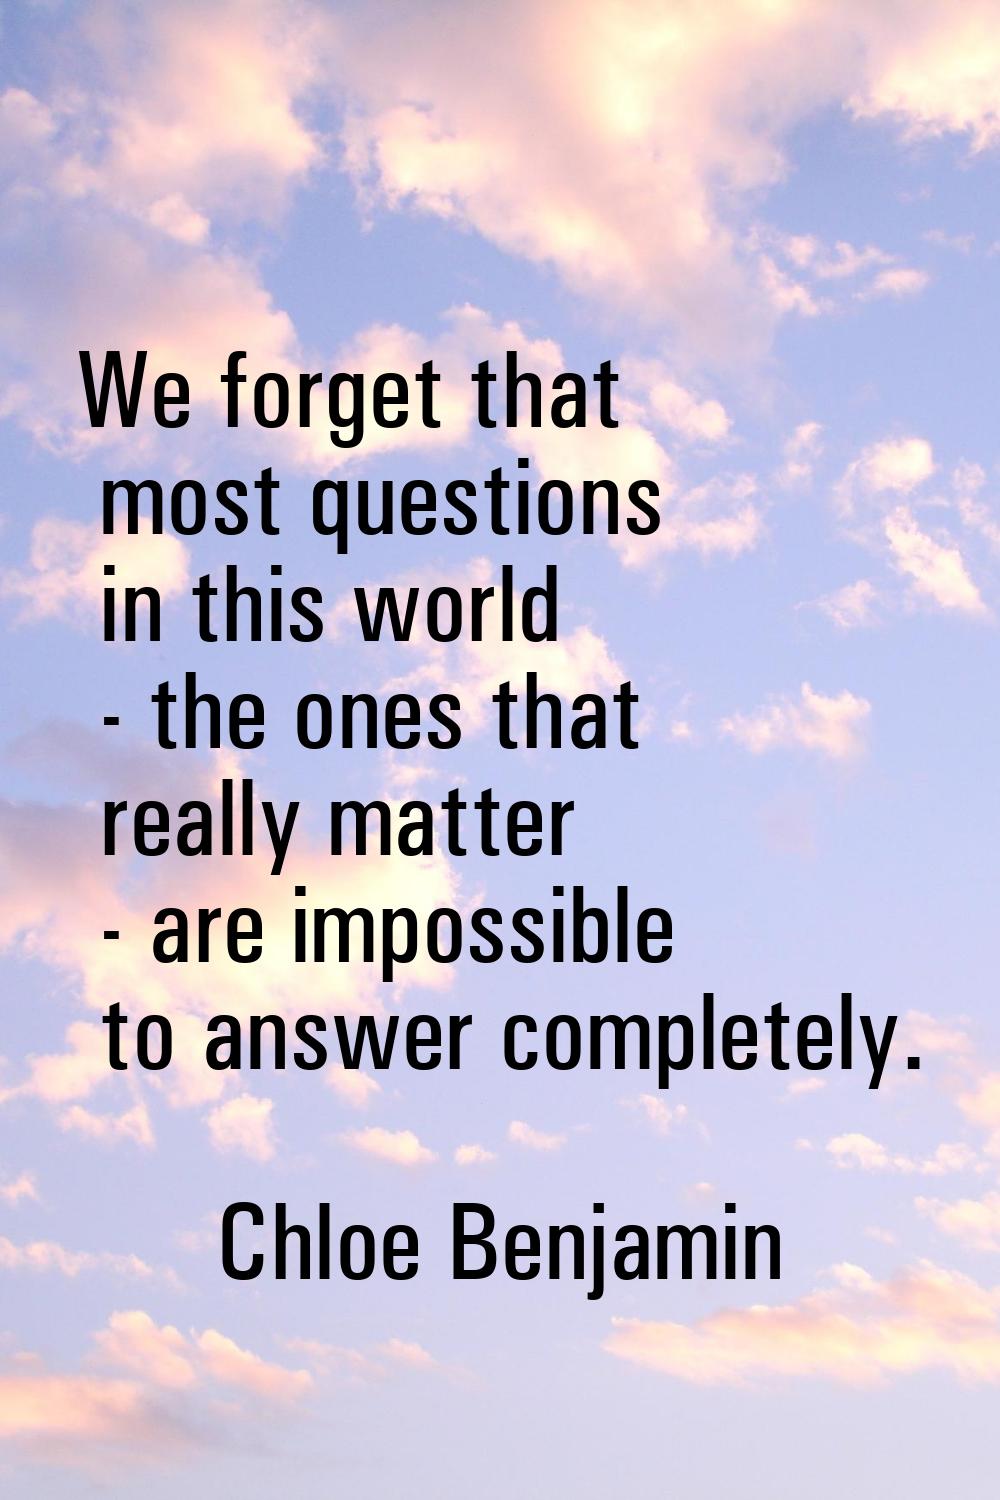 We forget that most questions in this world - the ones that really matter - are impossible to answe